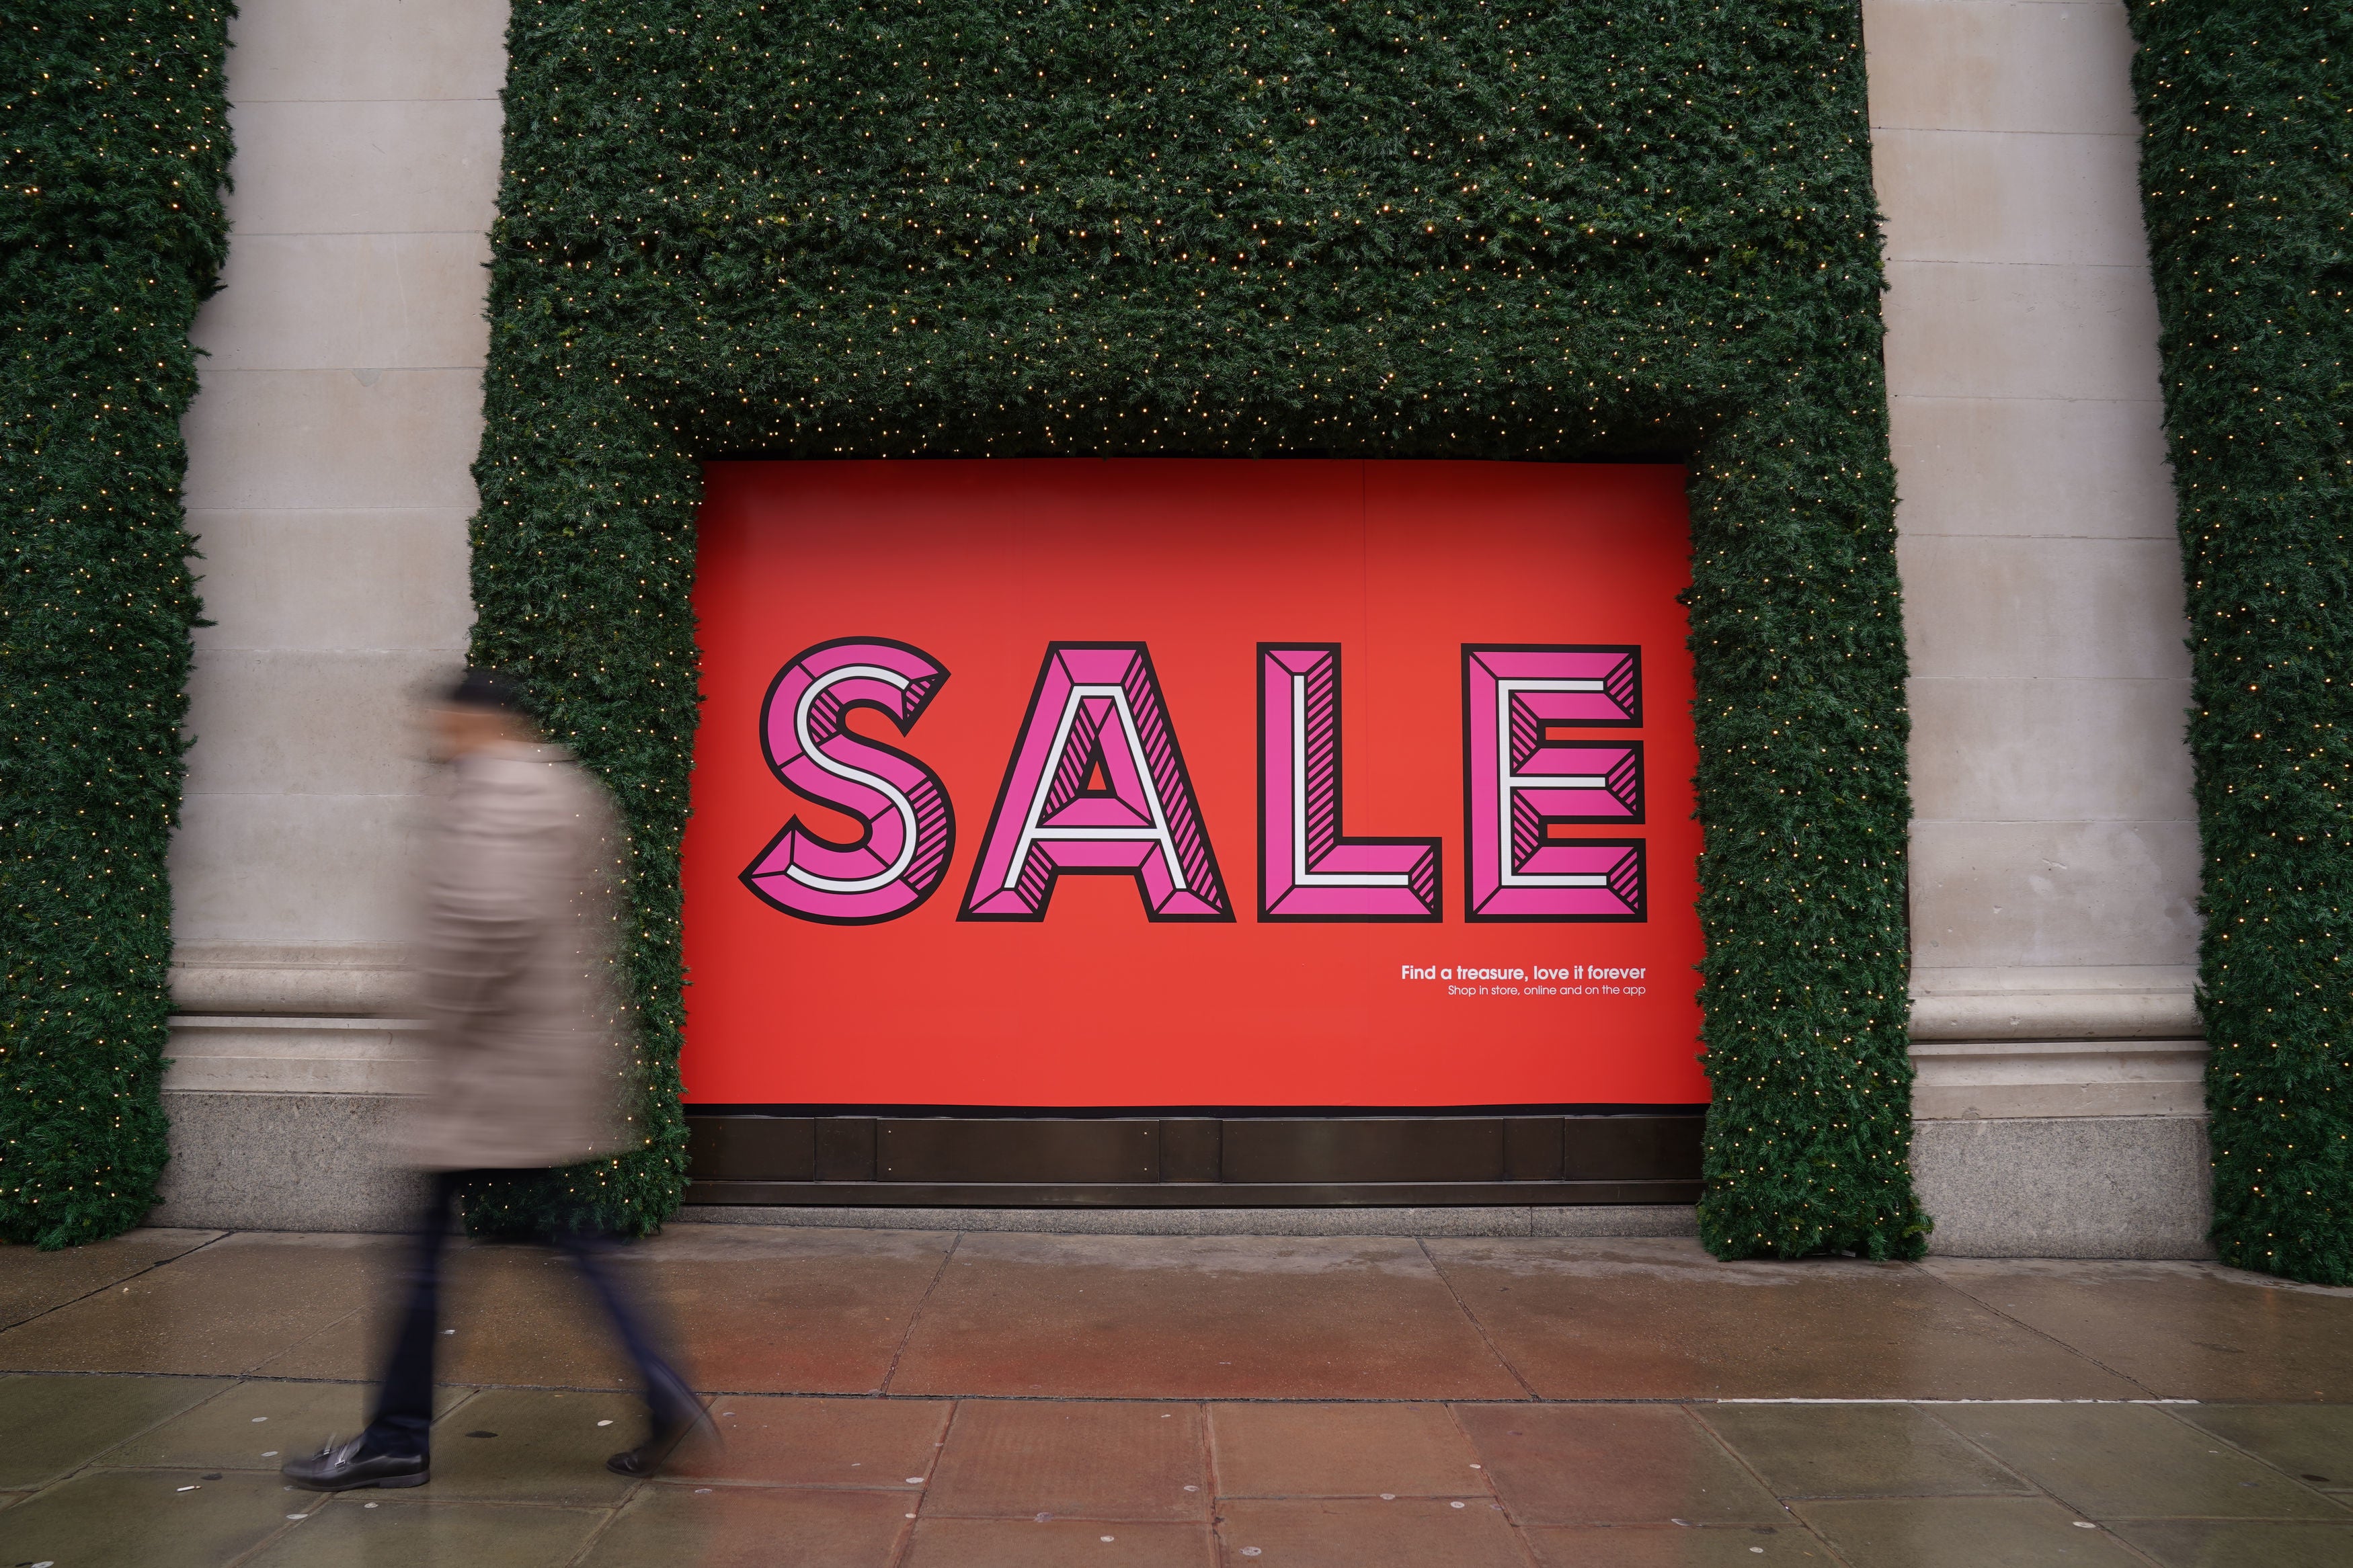 High streets saw shopper numbers slump sharply in December and Boxing Day sales spending is set to be lower, too